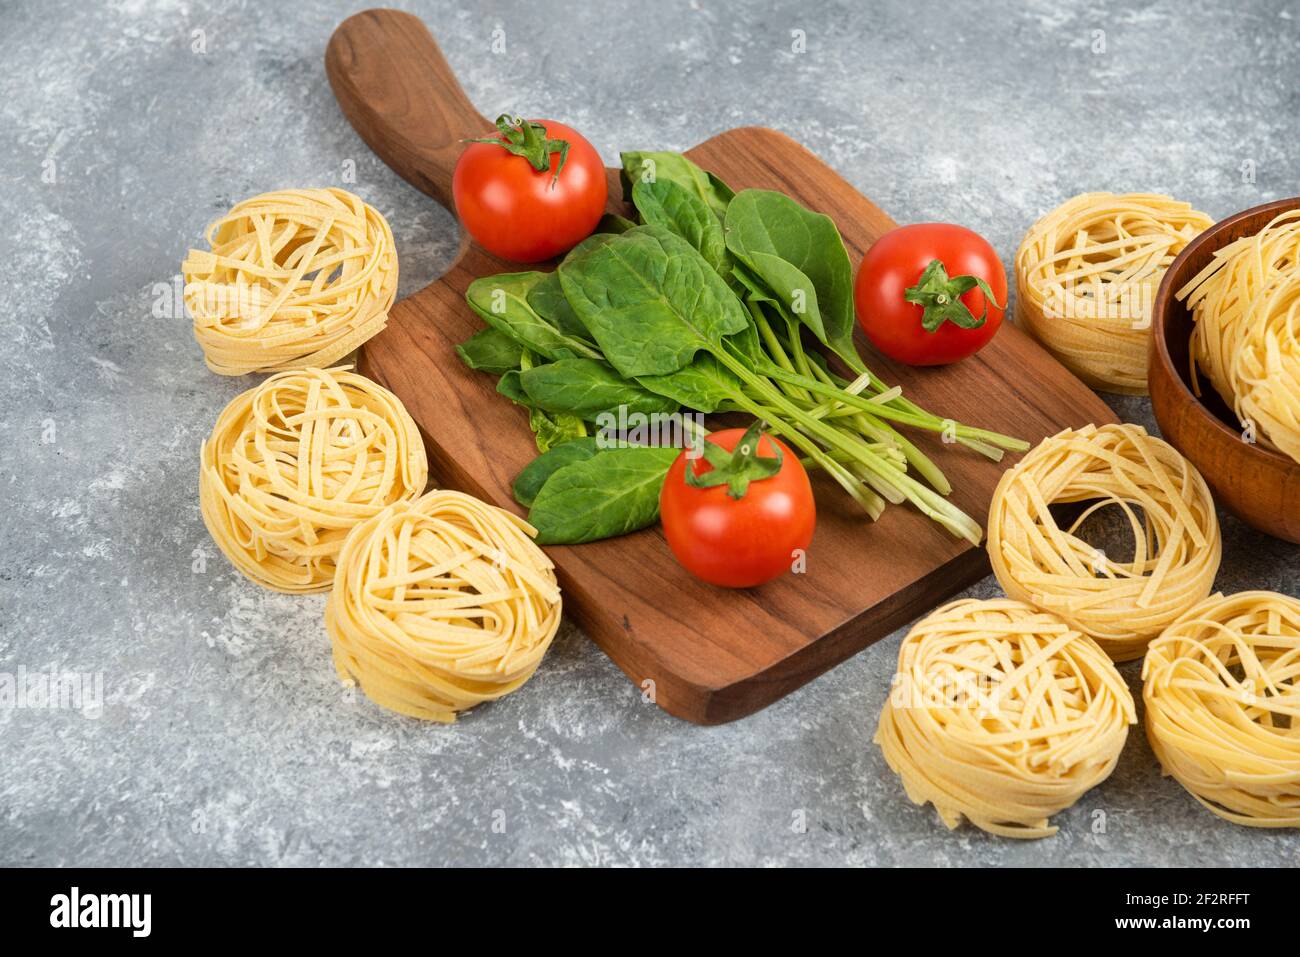 Wooden board with fresh vegetables and raw noodles on marble surface Stock Photo